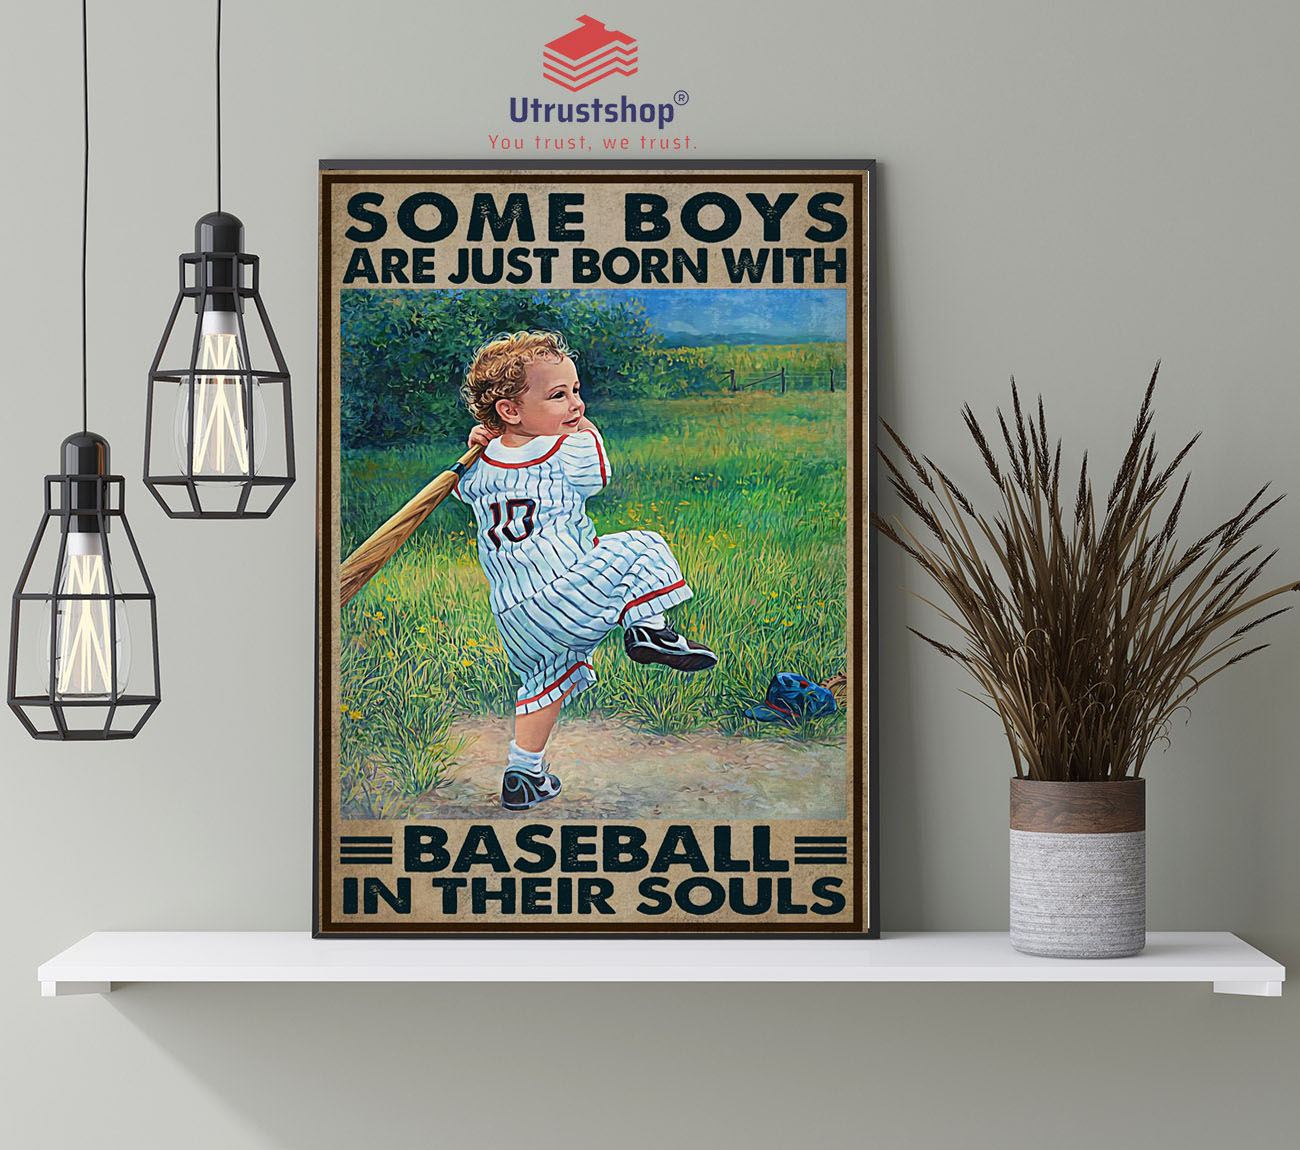 Some boys are just born with baseball in their souls poster4